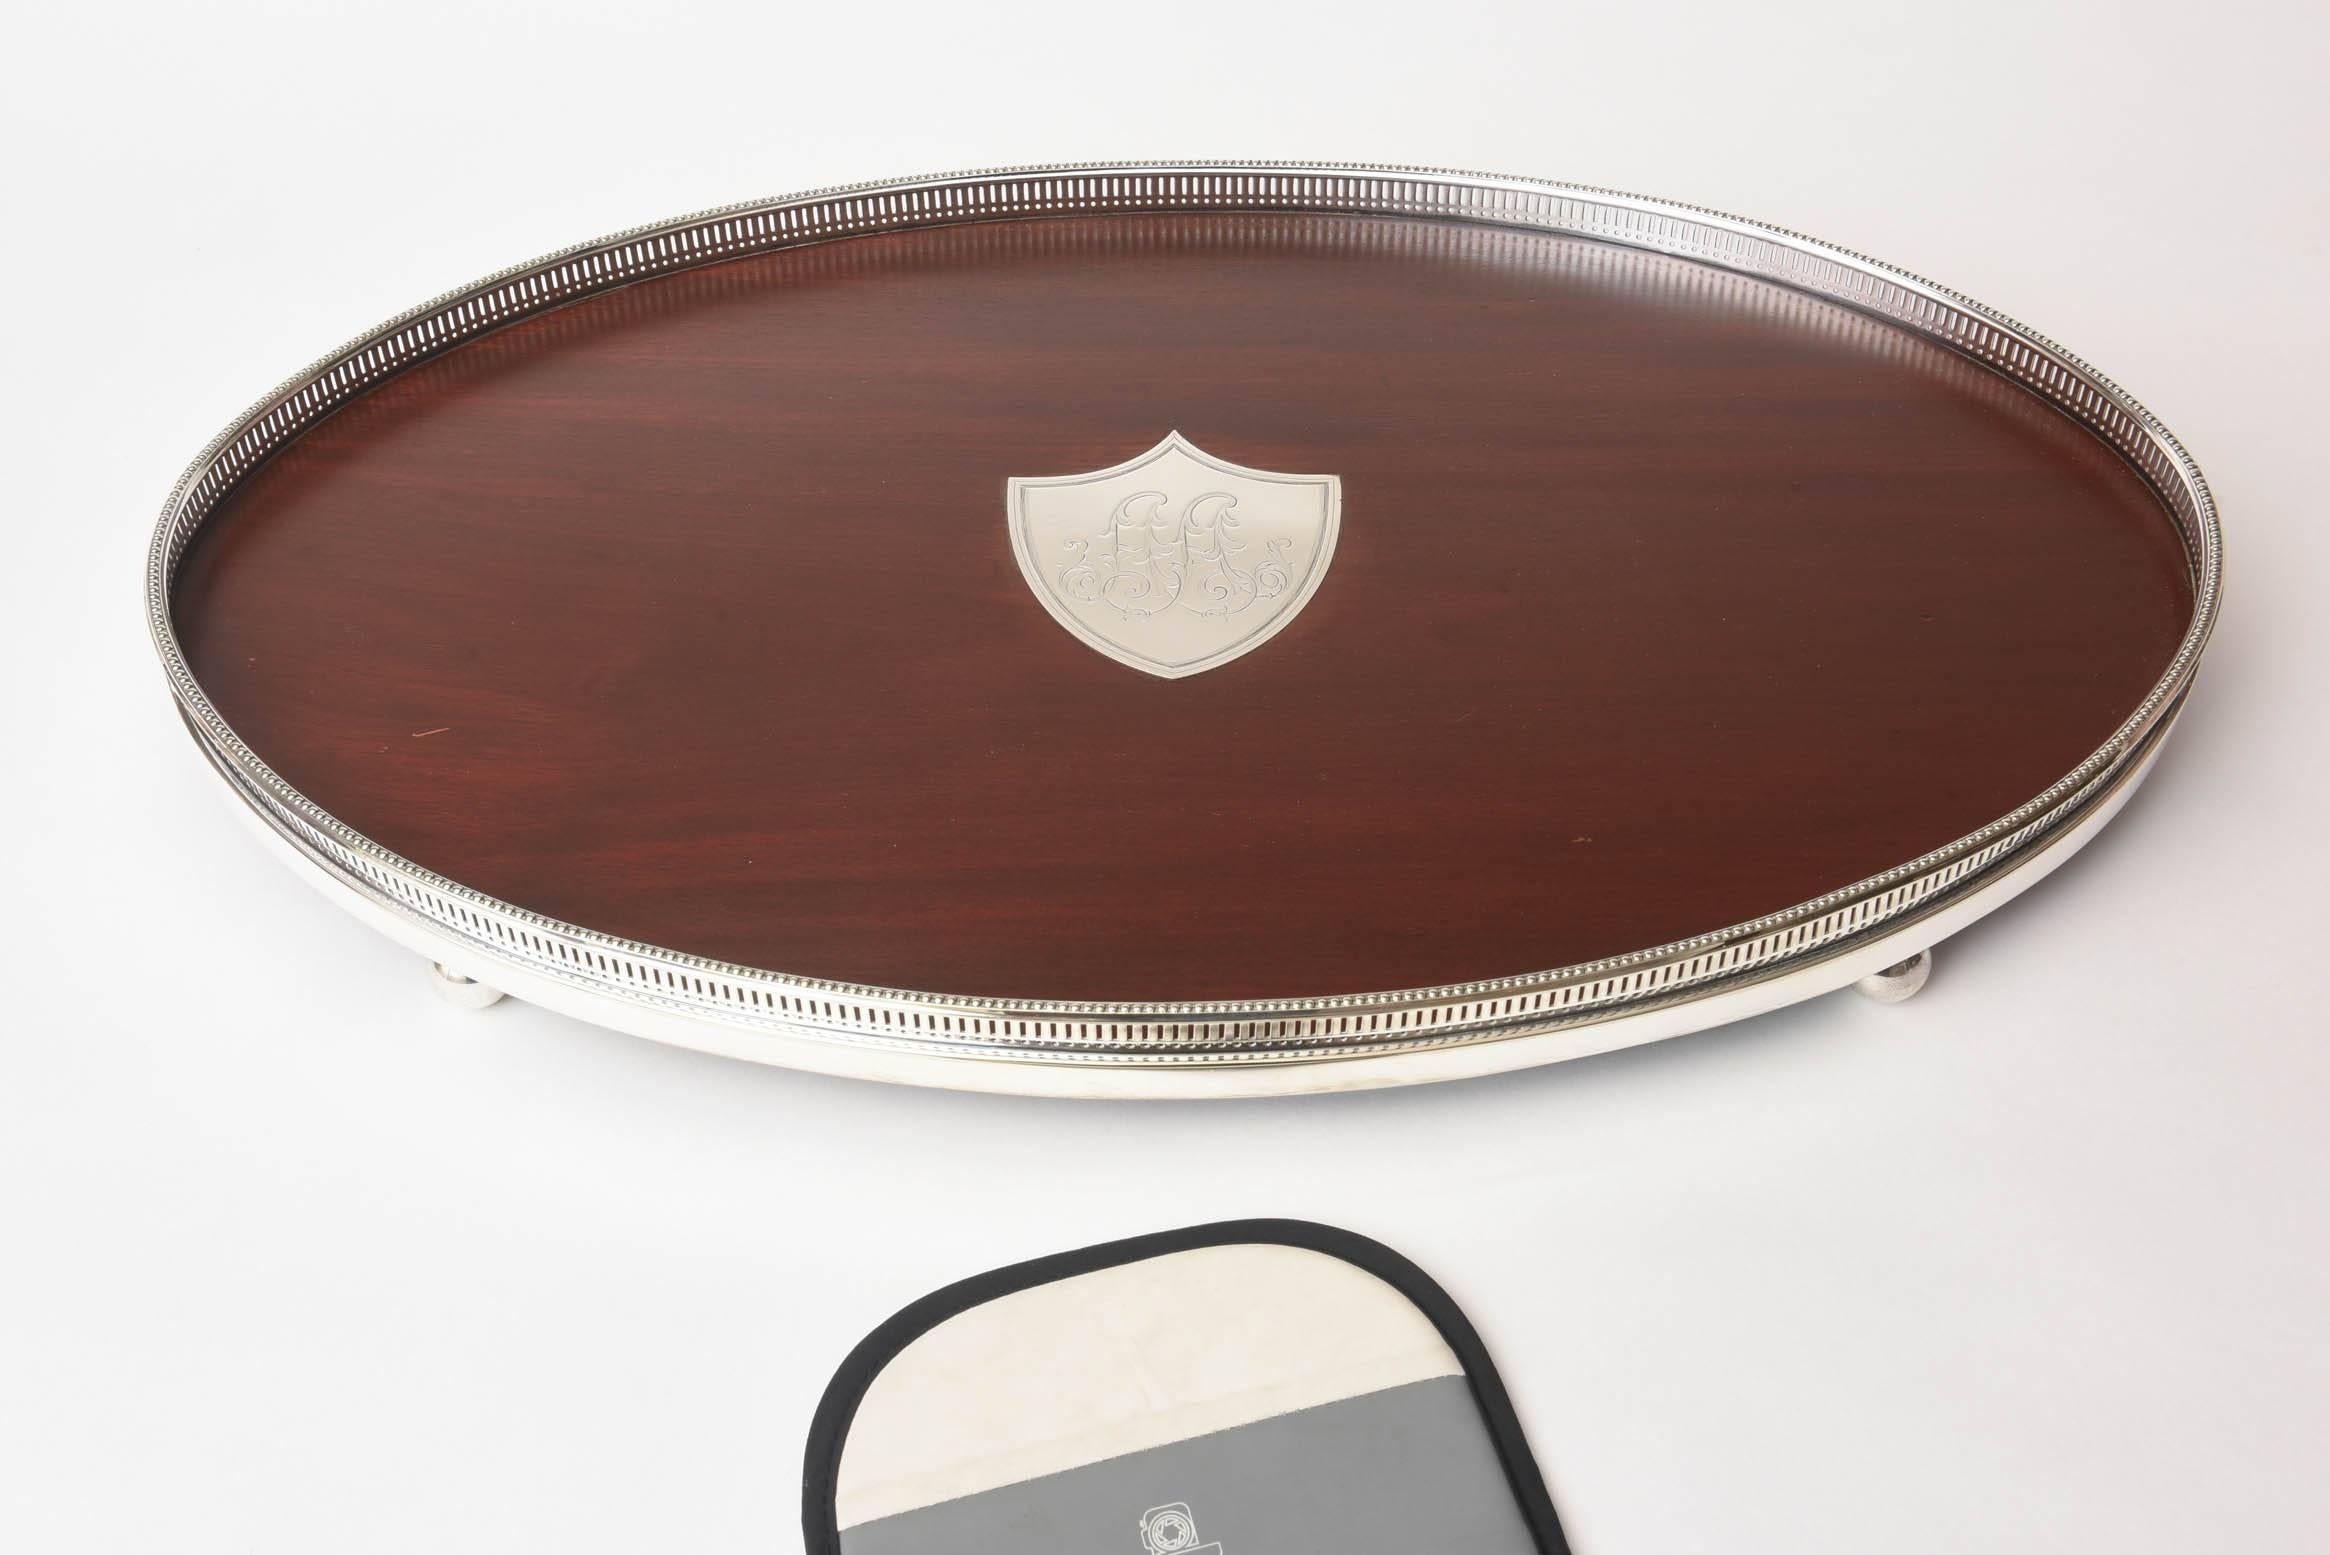 A lovely rosewood and silver plated oval shaped tray with solid sterling silver shield medallion insert. A pierced galley surround and in wonderful vintage condition.